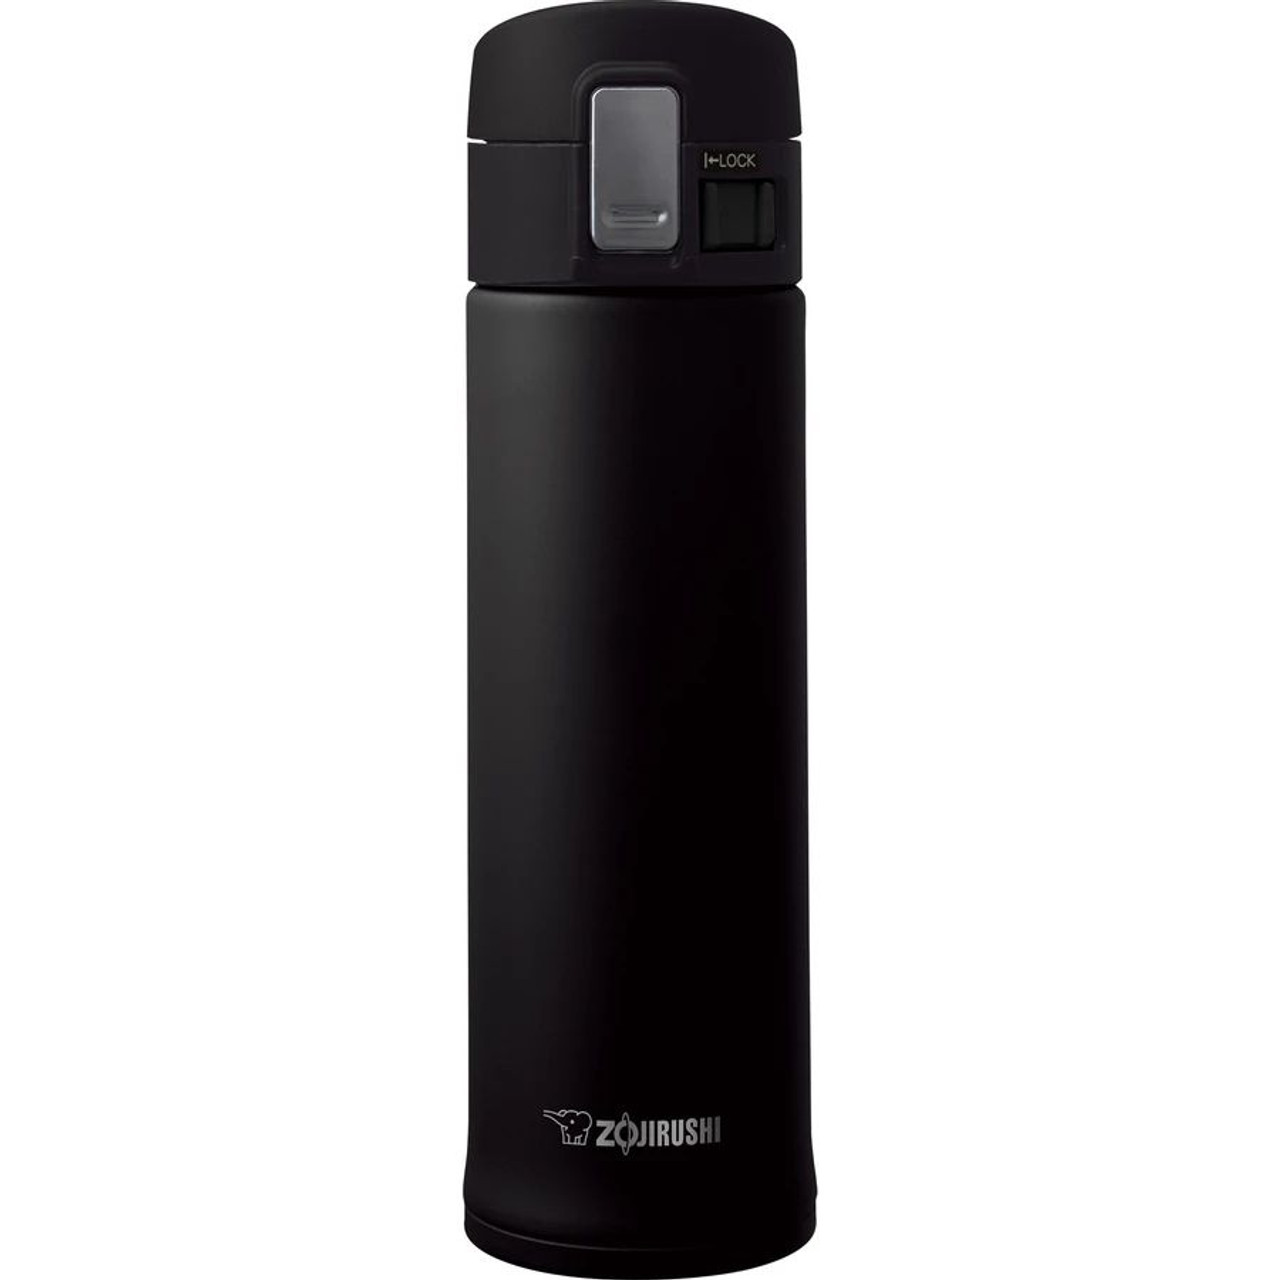 Zojirushi America Corporation - Our 16-oz Zojirushi Stainless Steel Vacuum  Insulated Mug SM-SG48EPP has over 19k+ reviews on , and holds a solid  5-stars. See why our iconic mug is the talk